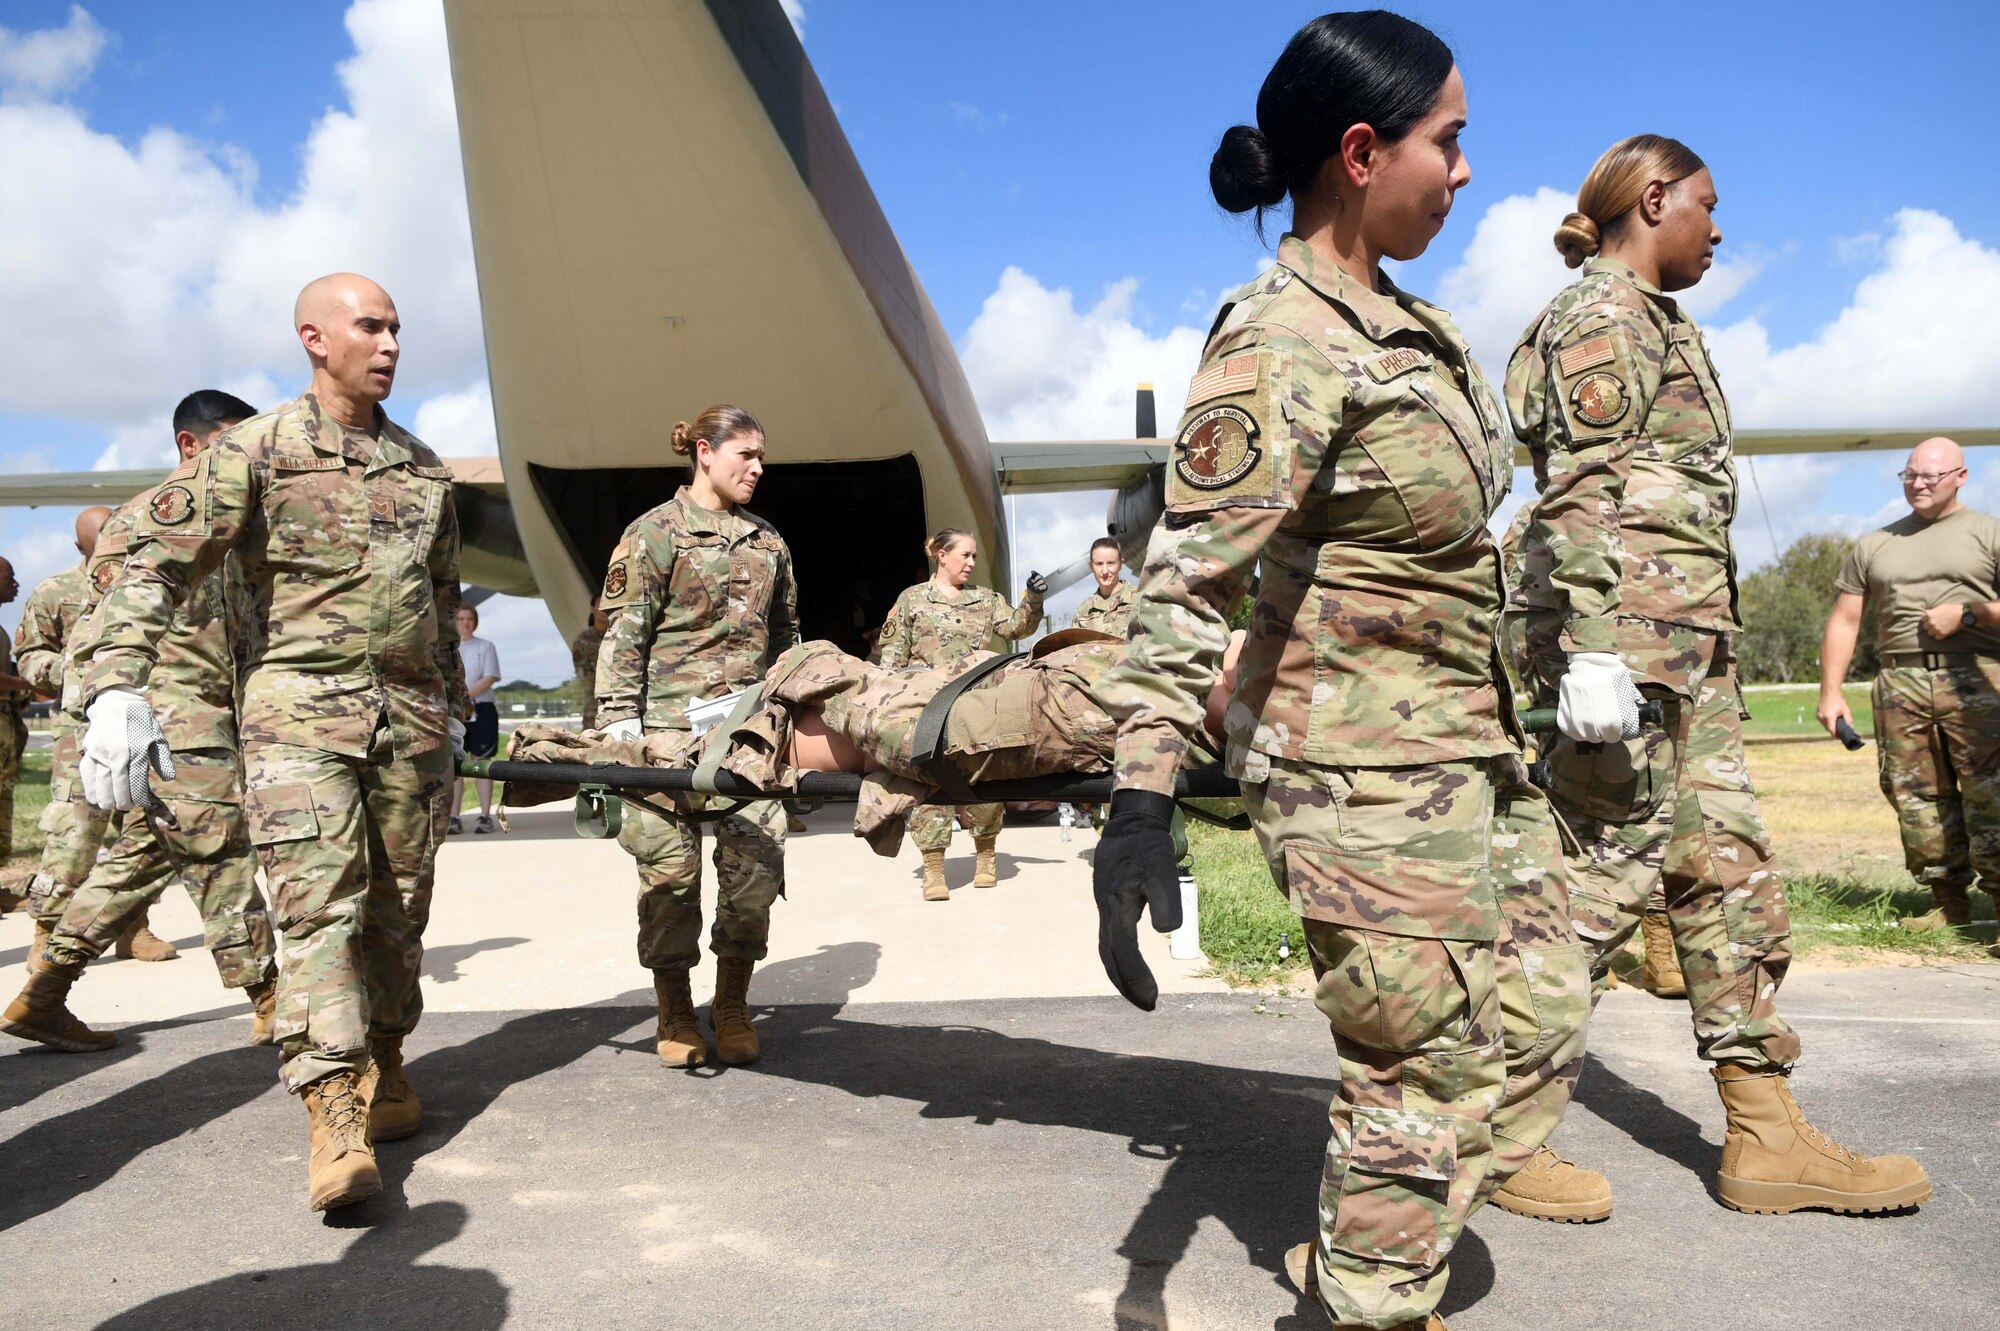 433rd Aeromedical Staging Squadron personnel transport a litter from a C-124 Globemaster II aircraft static display to an ambulatory vehicle during a ground patient movement training exercise at Joint Base San Antonio-Lackland, Texas, August 7, 2022. The use of the static display allowed participants to practice procedures in loading and offloading a C-130 Hercules aircraft during a medevac mission. (U.S. Air Force photo by Tech. Sgt. Mike Lahrman)